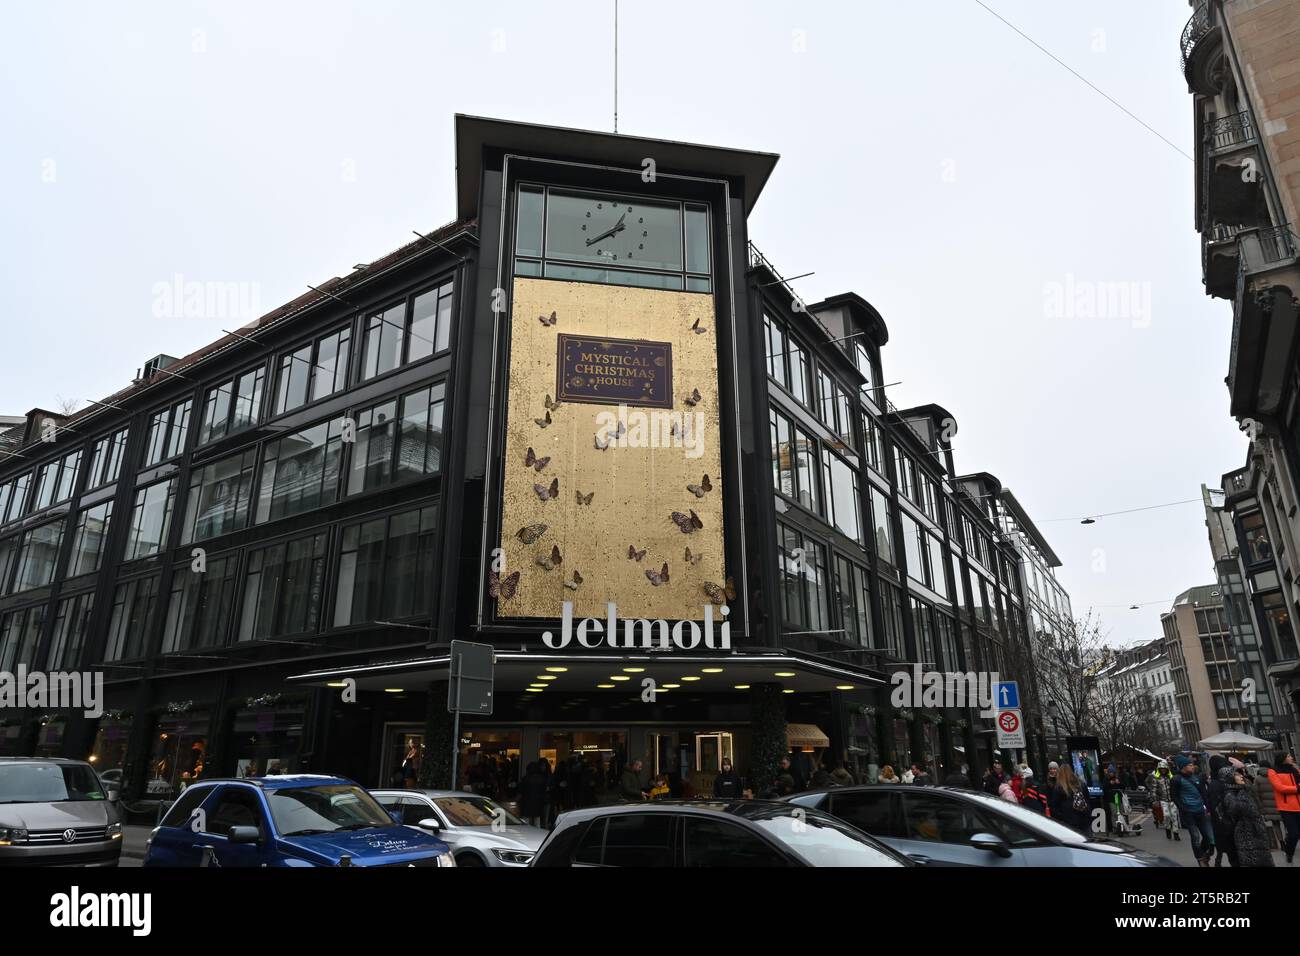 Jelmoli, shopping center in the city center of Zurich selling luxury designer clothes, accessories, jewellery and household articles. Stock Photo